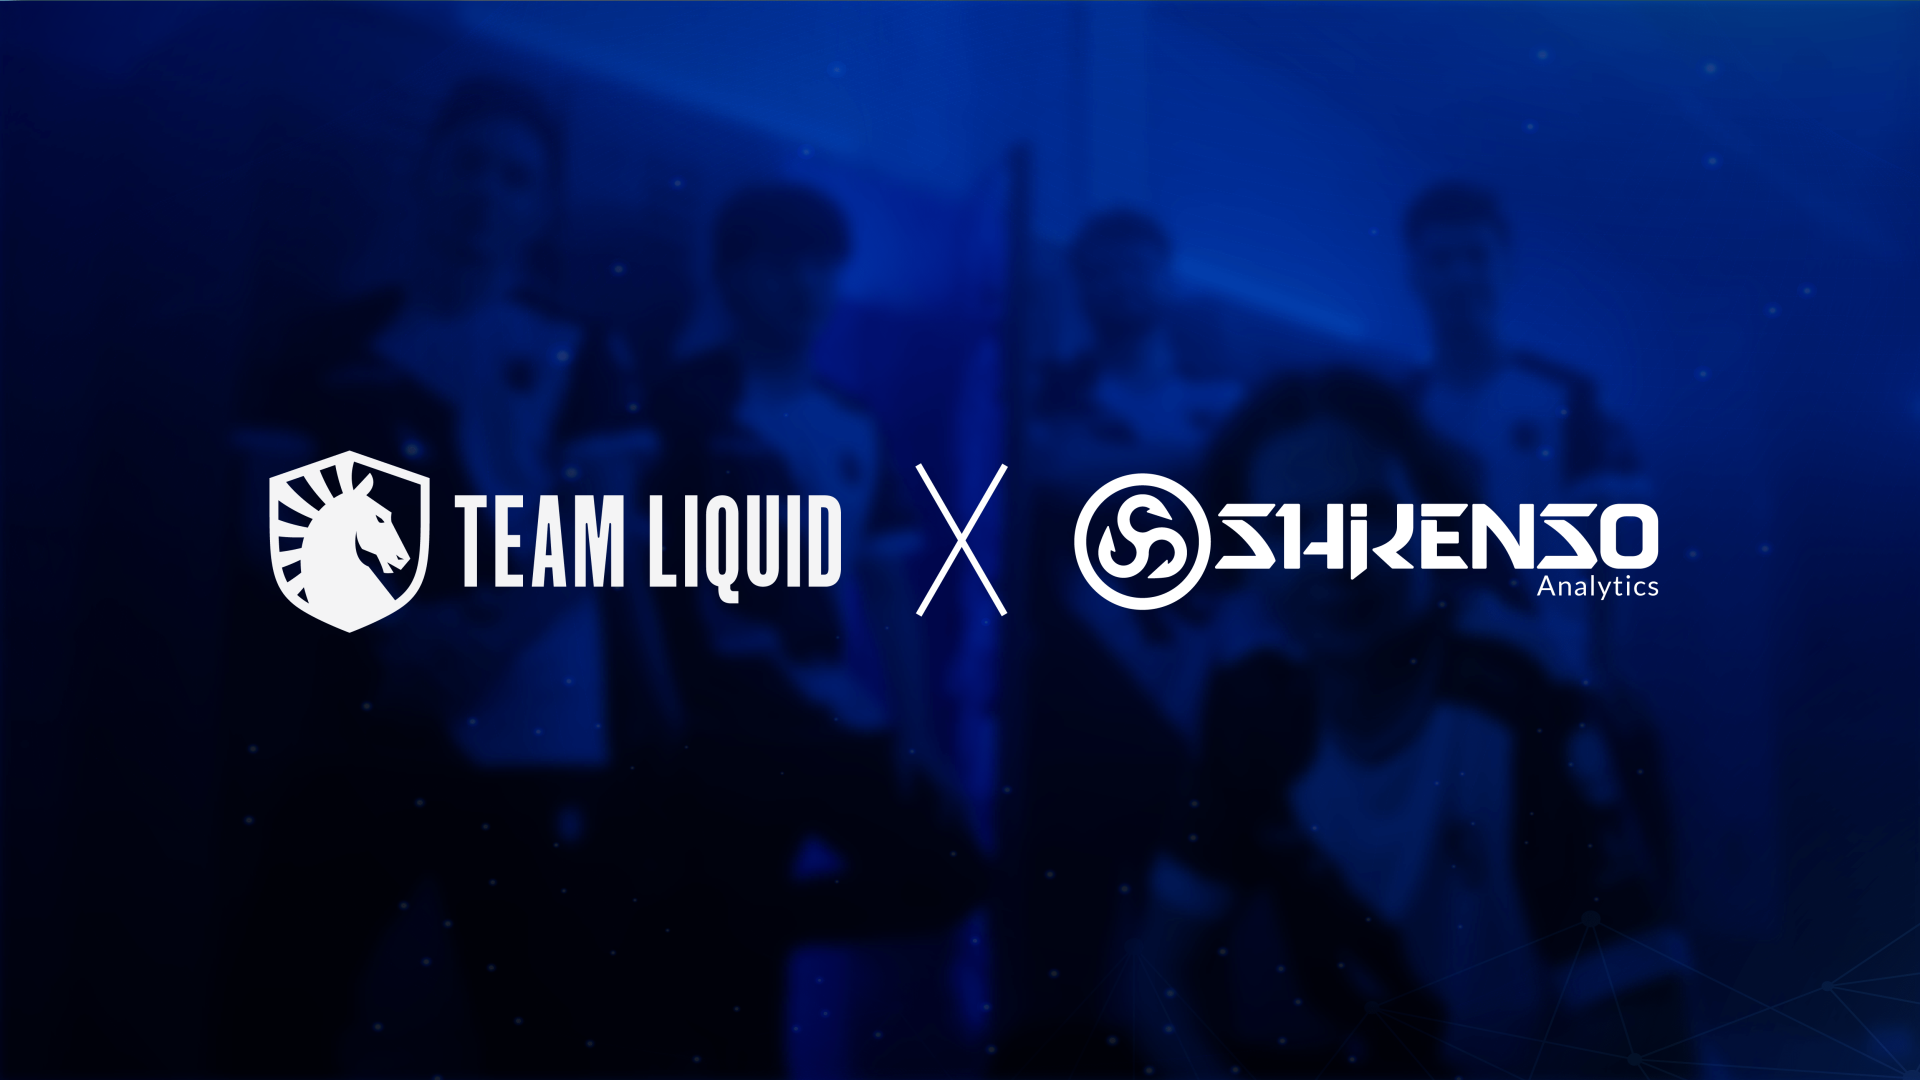 Team Liquid looks to bolster partnerships with Shikenso Analytics deal